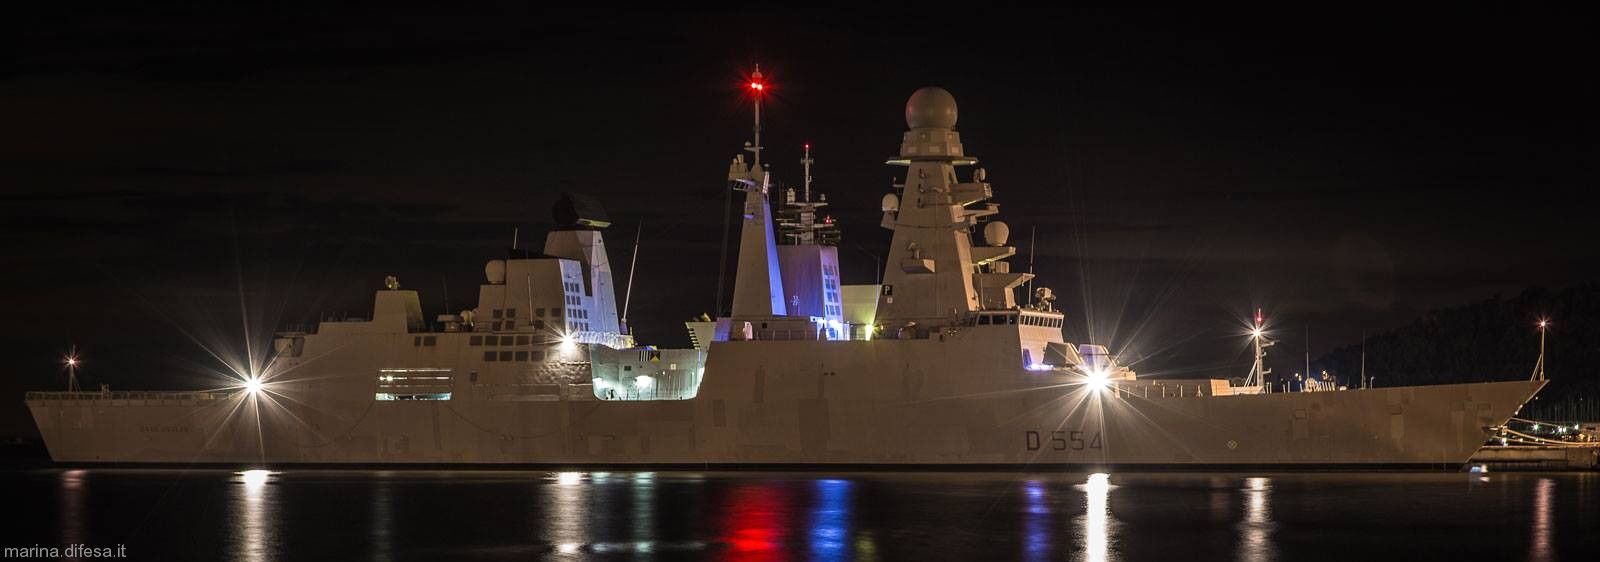 d-554 caio duilio its nave horizon class guided missile destroyer italian navy 31